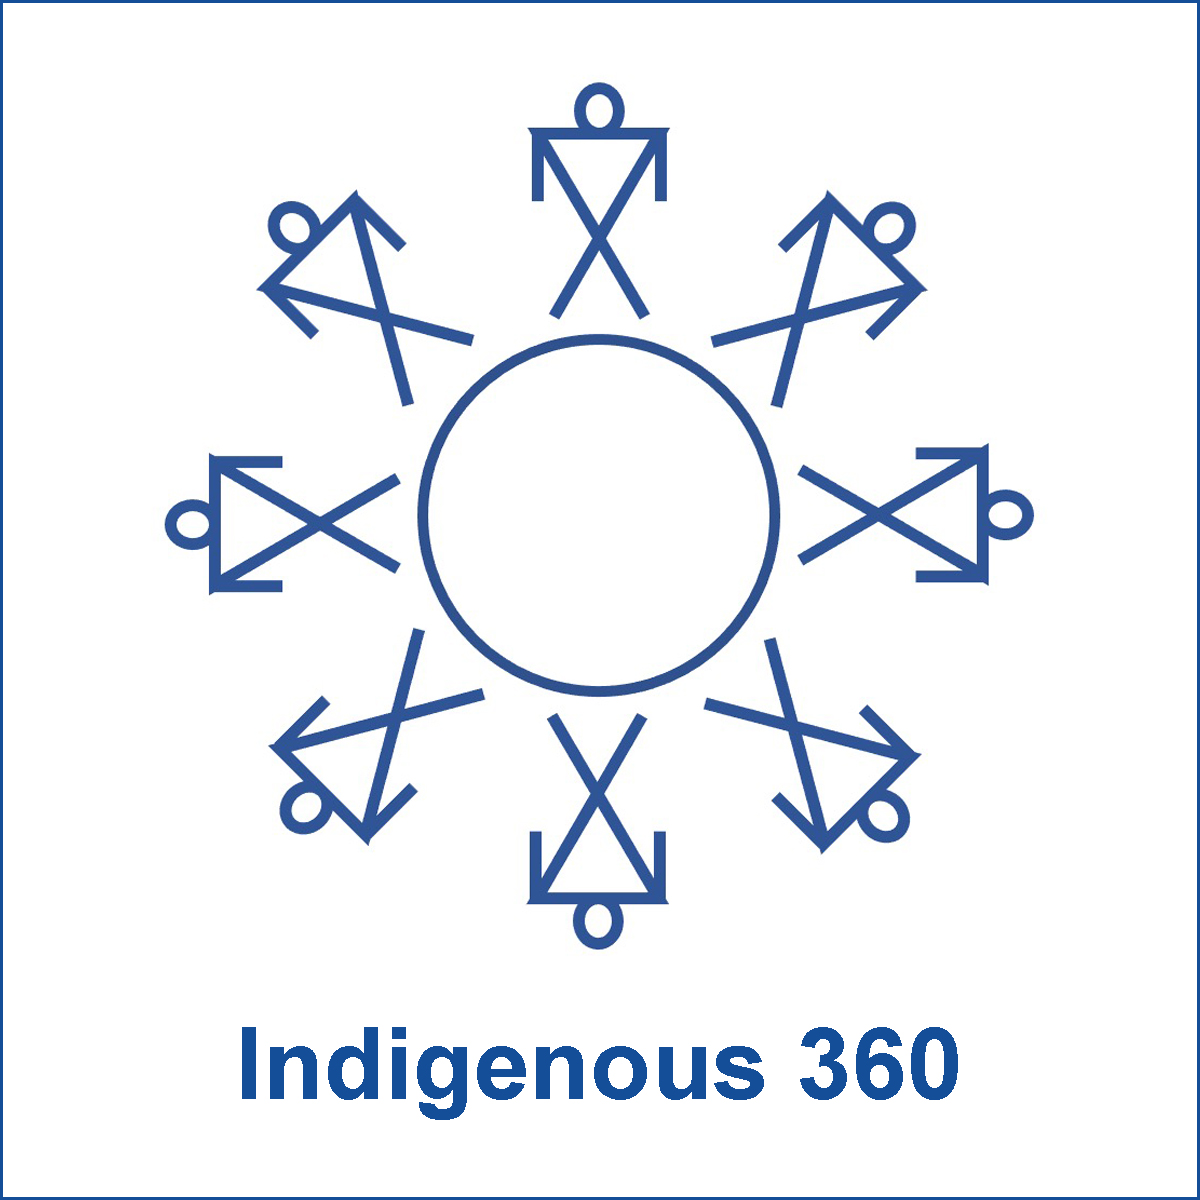 Artwork for the section on Indigenous 360  in the Saagajiwe Indigenous Knowledges Open Source Encylopedia